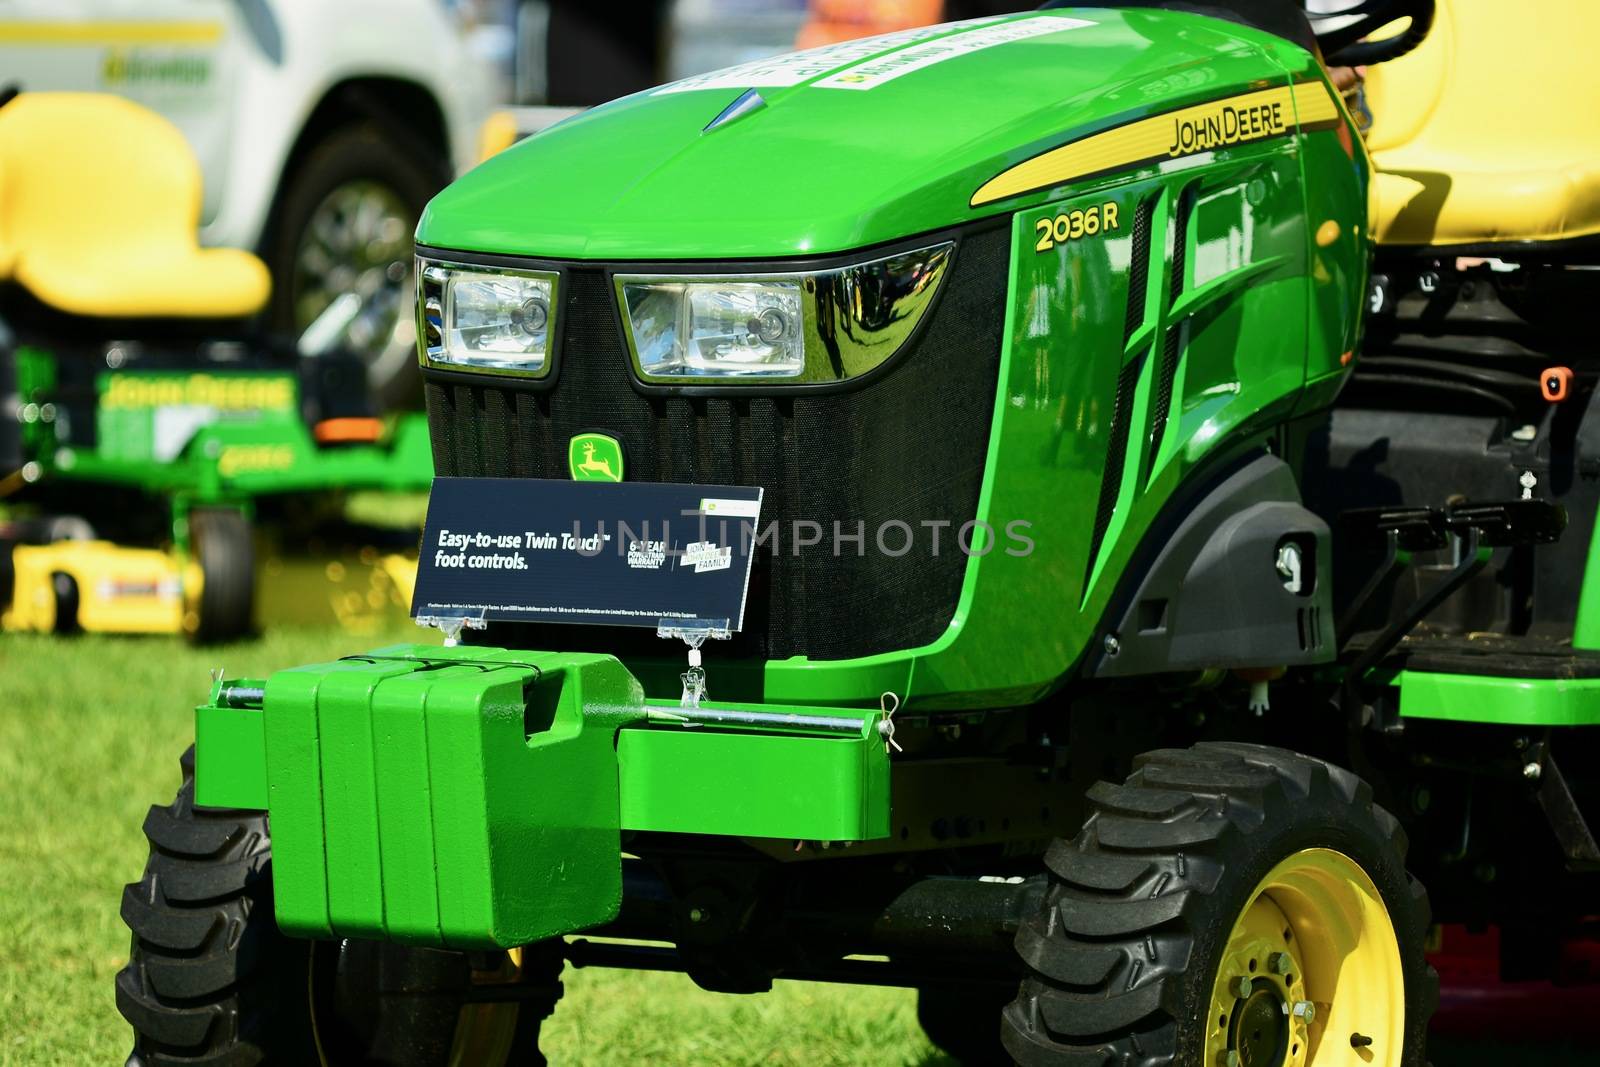 Agricultural machinery for sale; farmers show